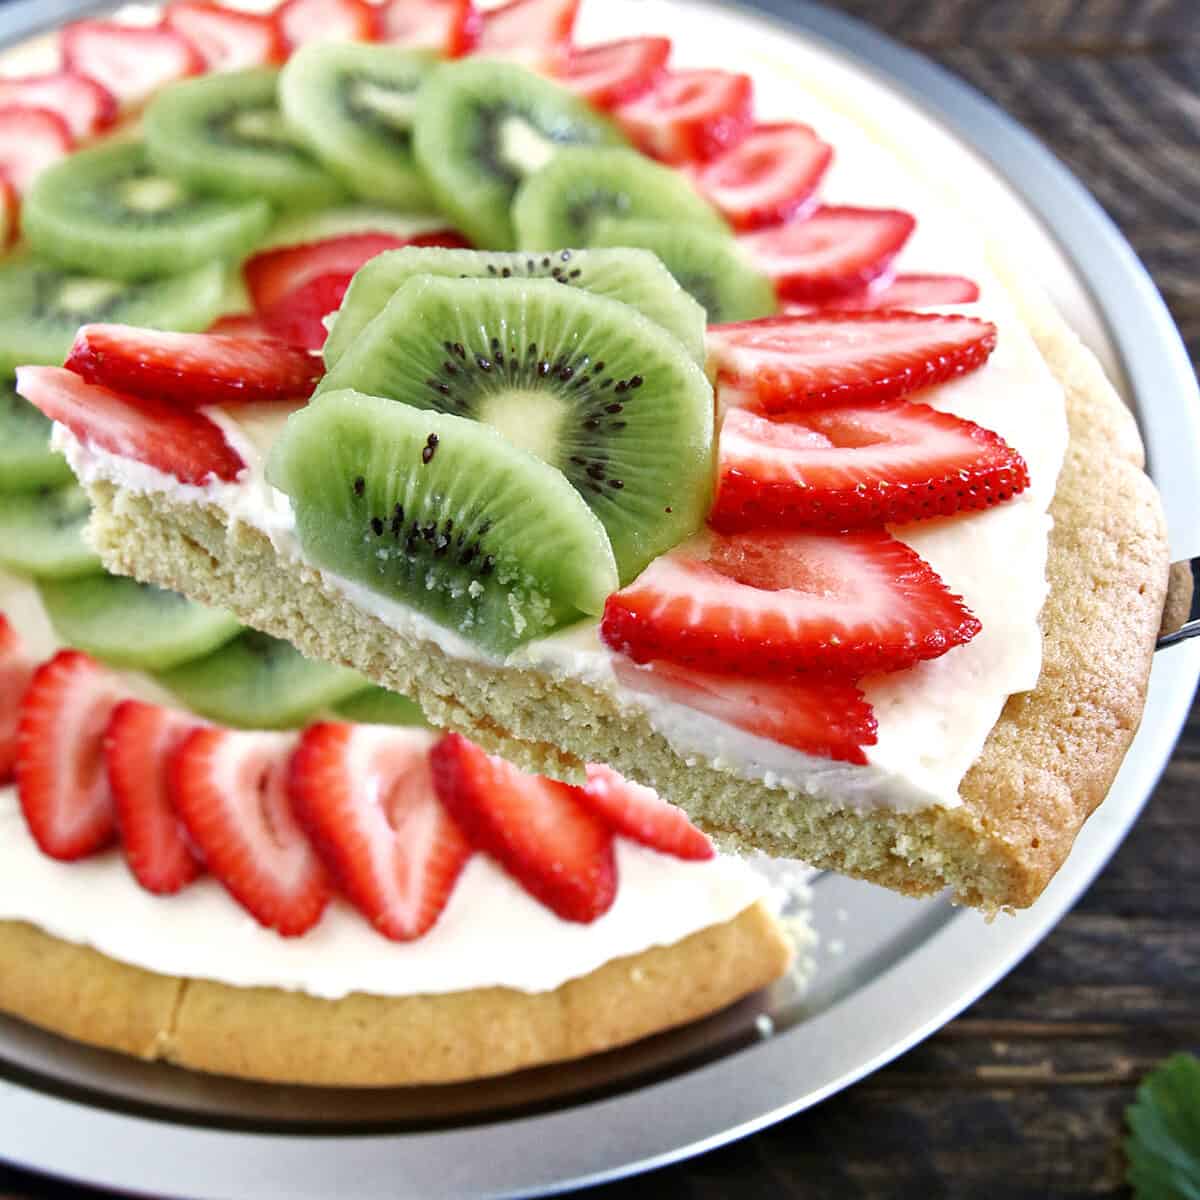 Another kid-friendly project is up again! Of course, there are lots of different fruit you can put on dessert pizza, but strawberry and kiwi is our family's absolute favorite combination, and this Strawberry Kiwi Dessert Pizza is my kid’s favorite dessert pizza.